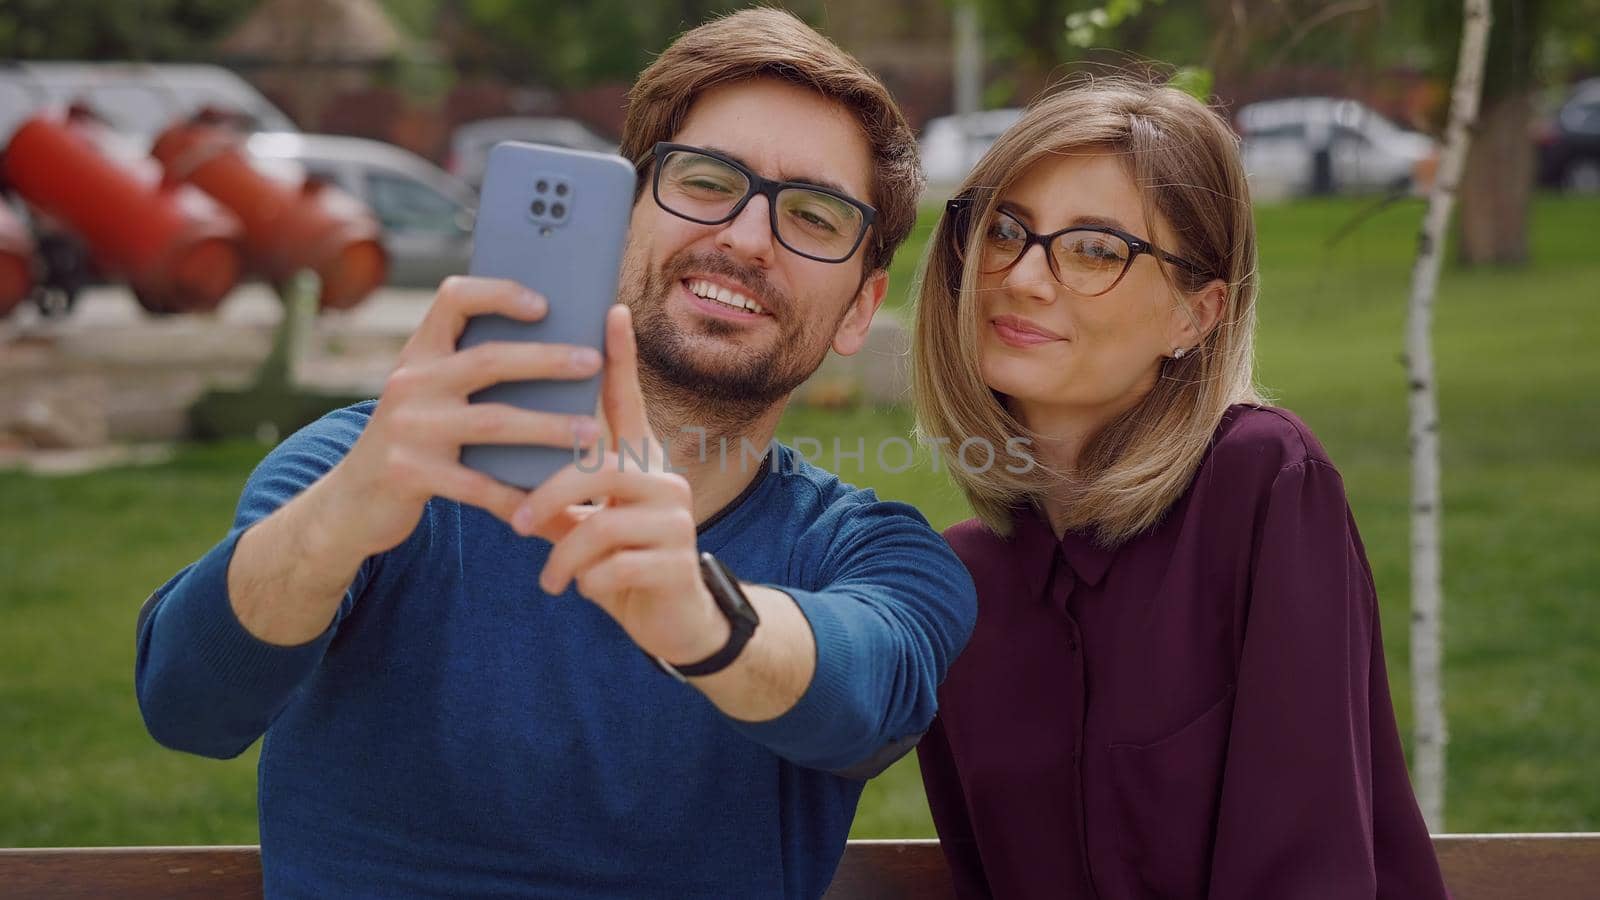 Friends woman and man take selfie with phone by RecCameraStock